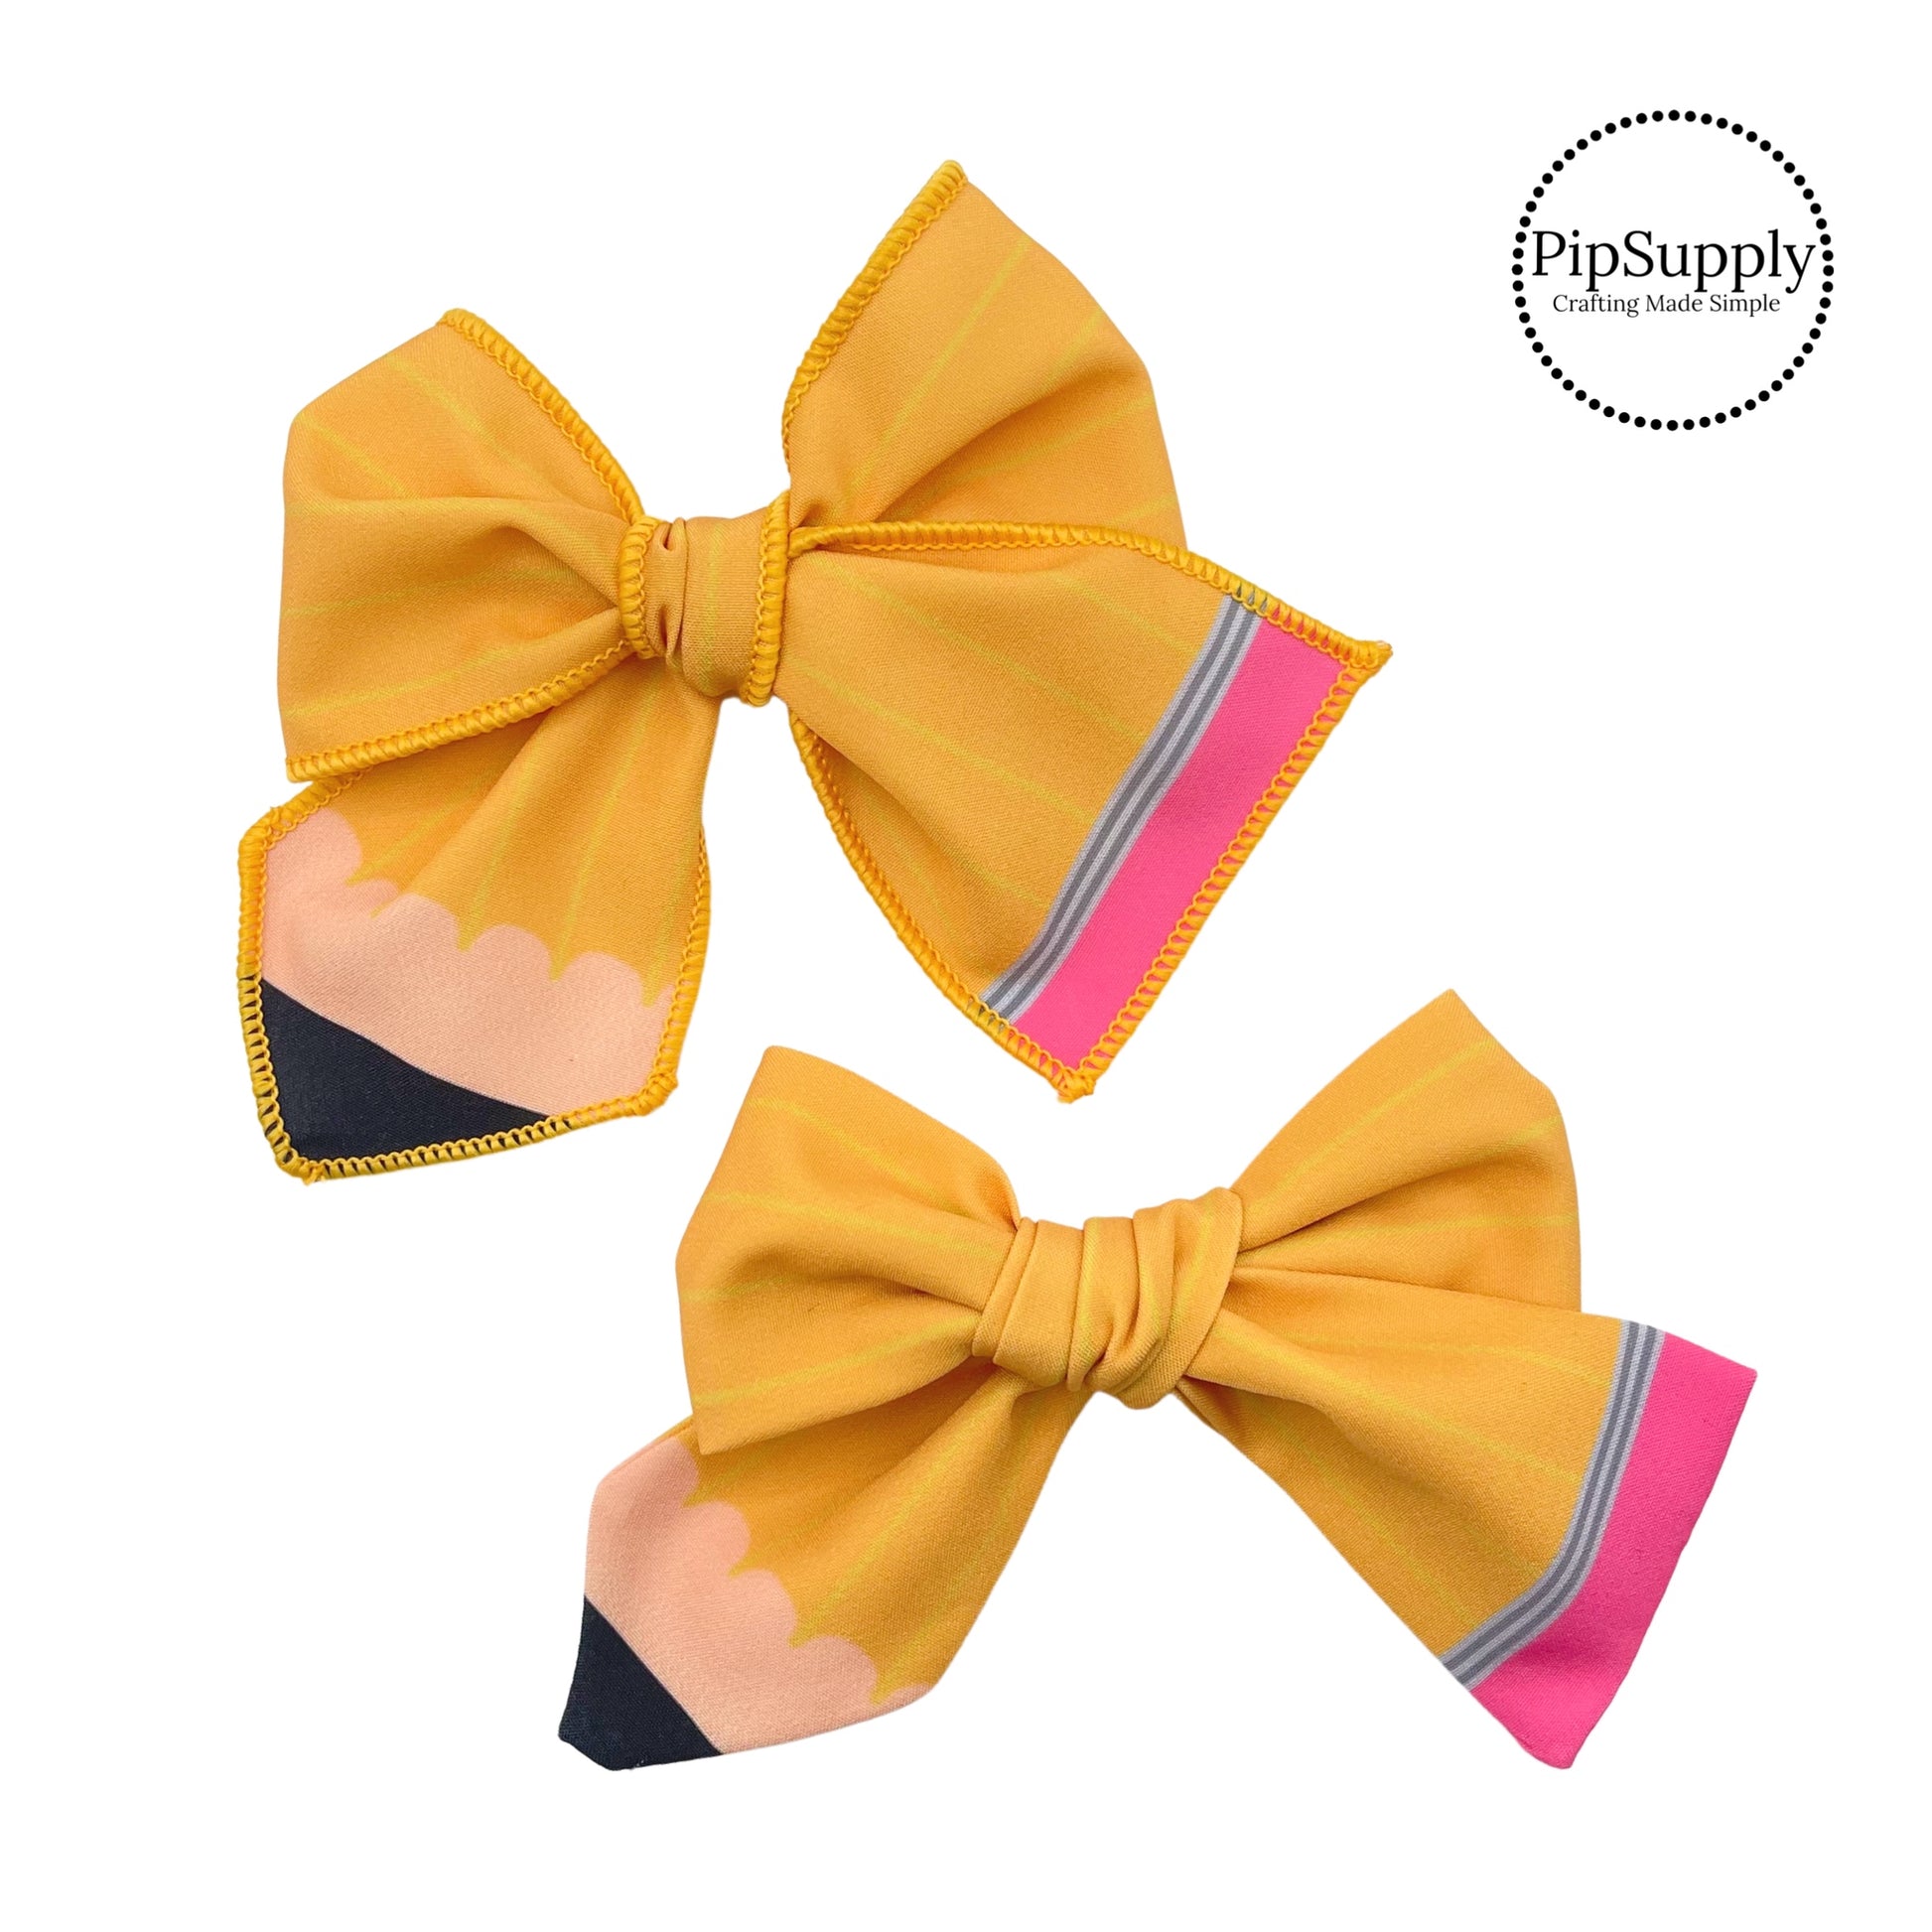 Yellow lined pencil with pink eraser and black led hair bow strips